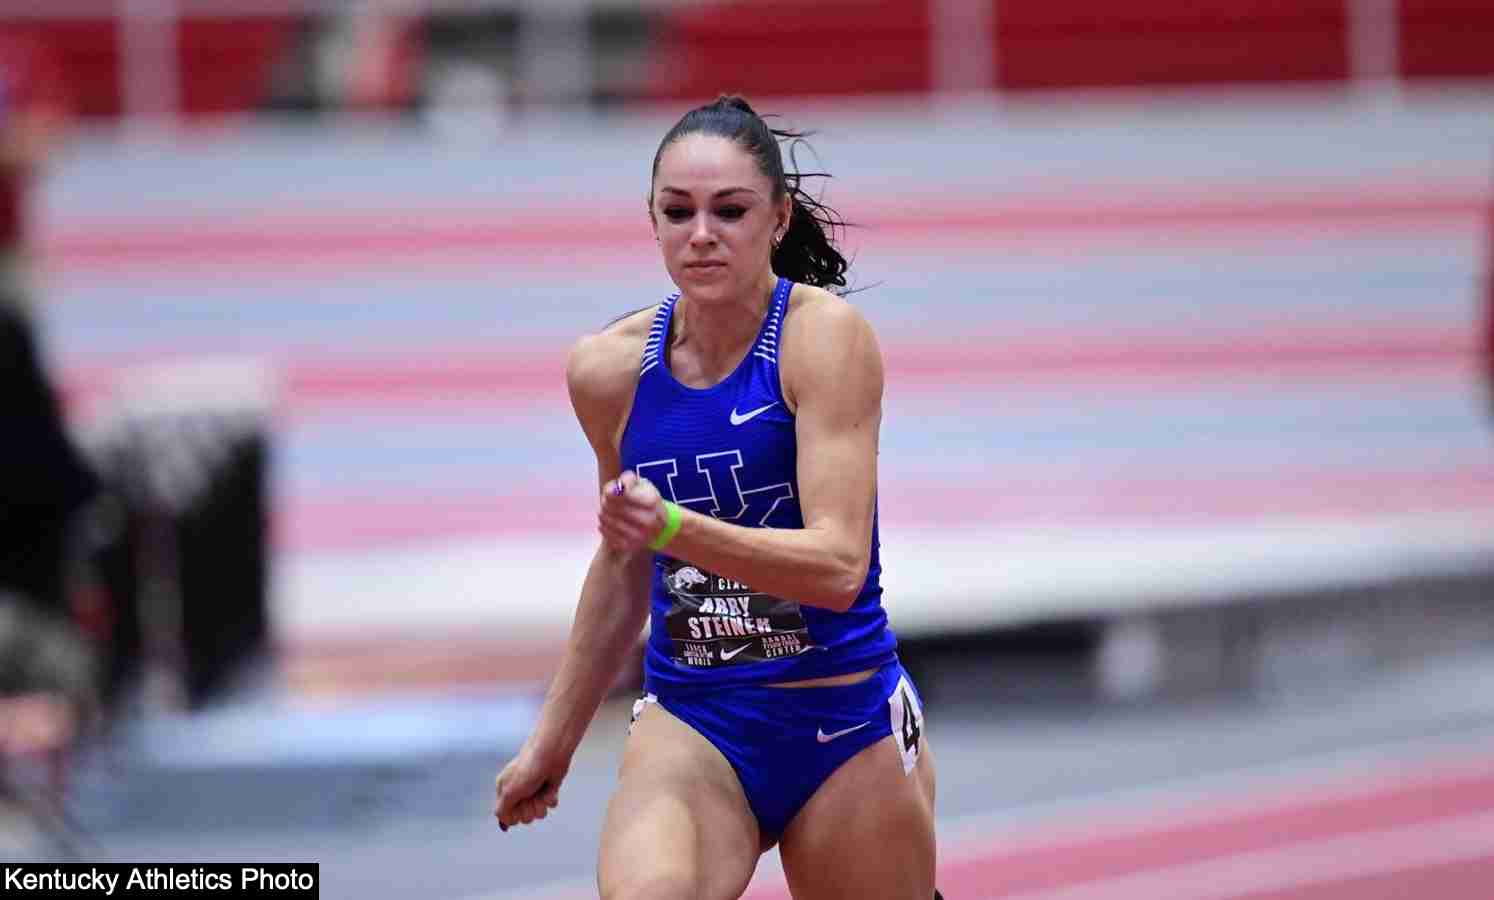 Abby Steiner wins 400m in season opener with 51.70